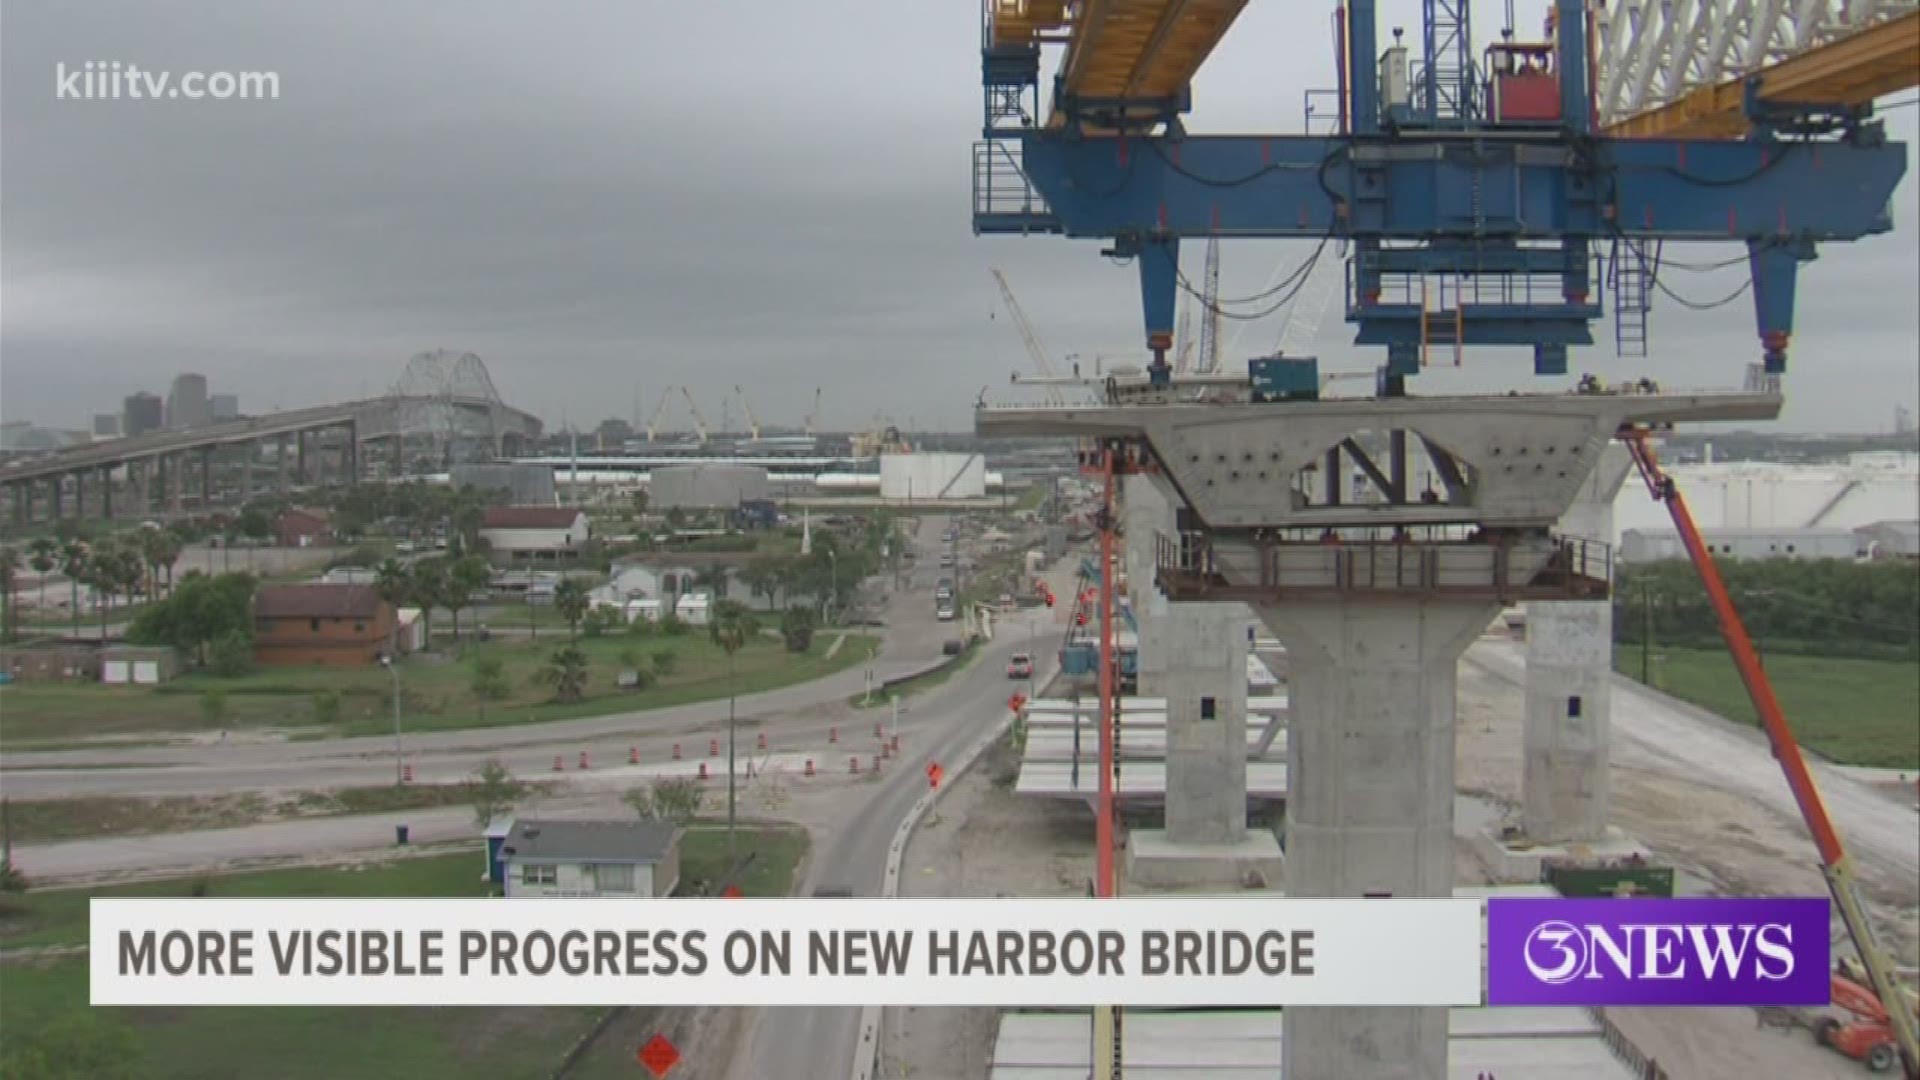 More sections are up on the north approach to the new Harbor Bridge in Corpus Christi, Texas, and drivers can now start to see the curvature of the longest suspension bridge to be built in North America.